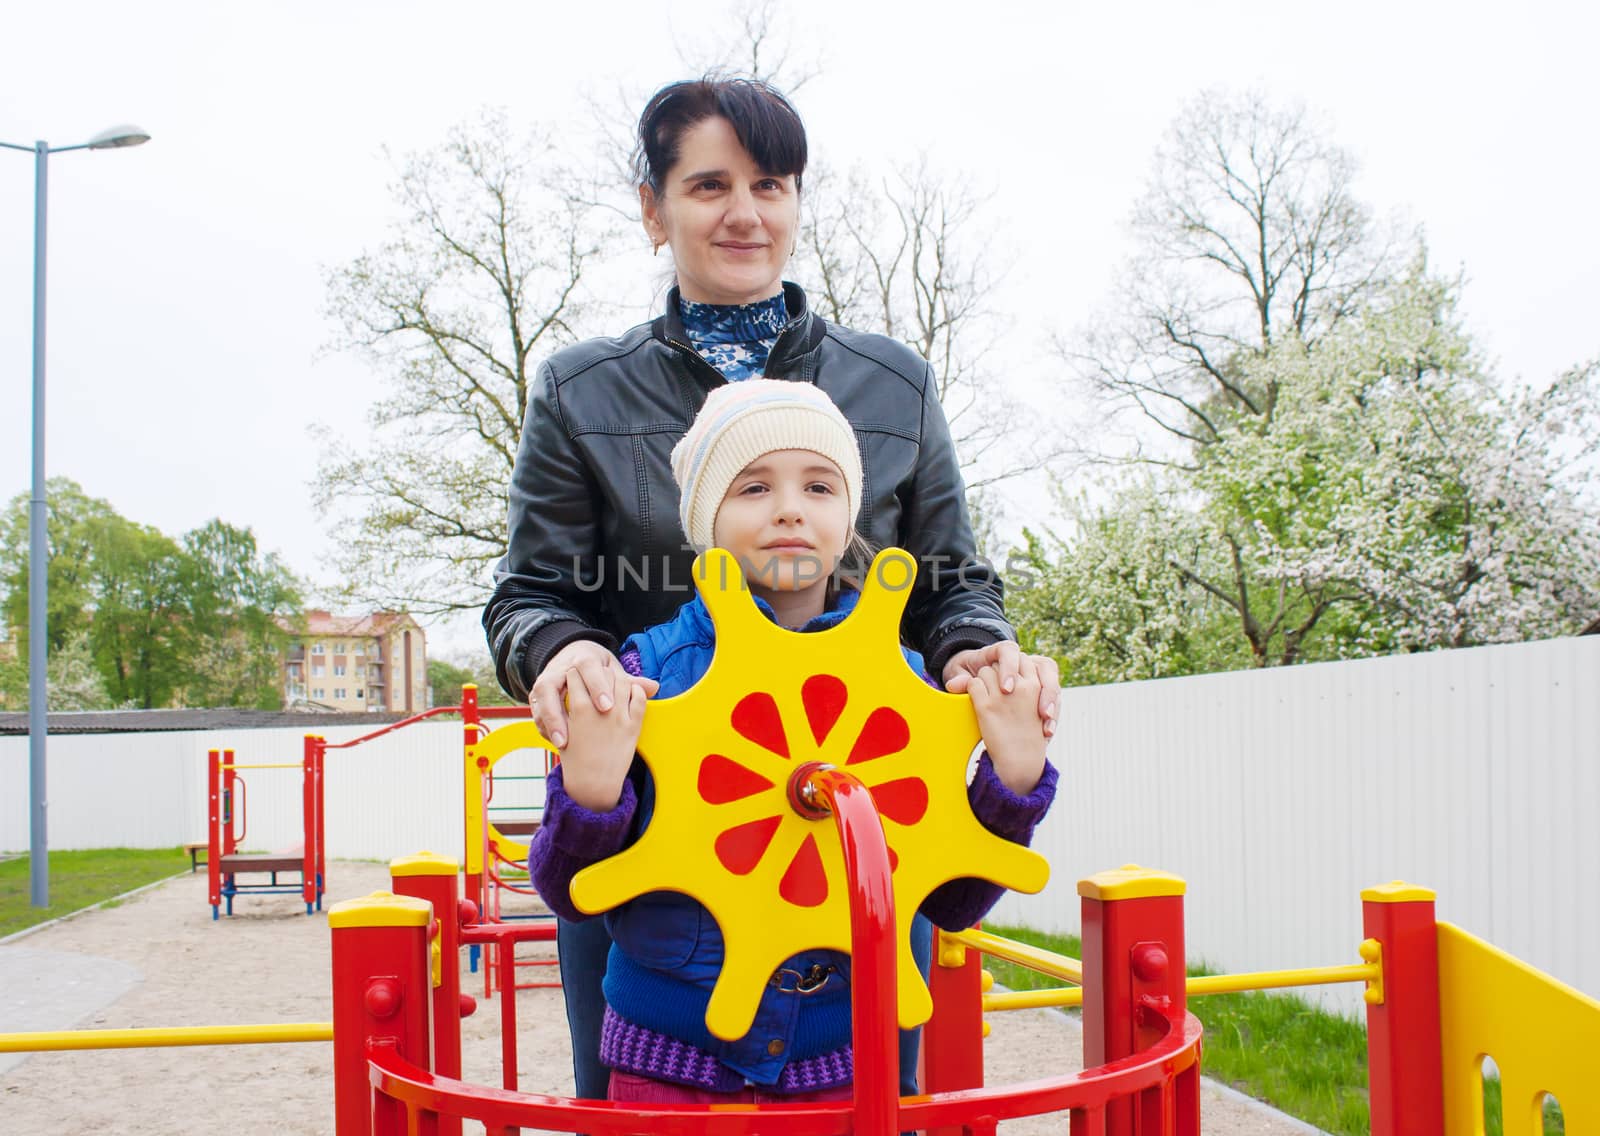 mom plays with her daughter at the playground on a toy ship by raddnatt